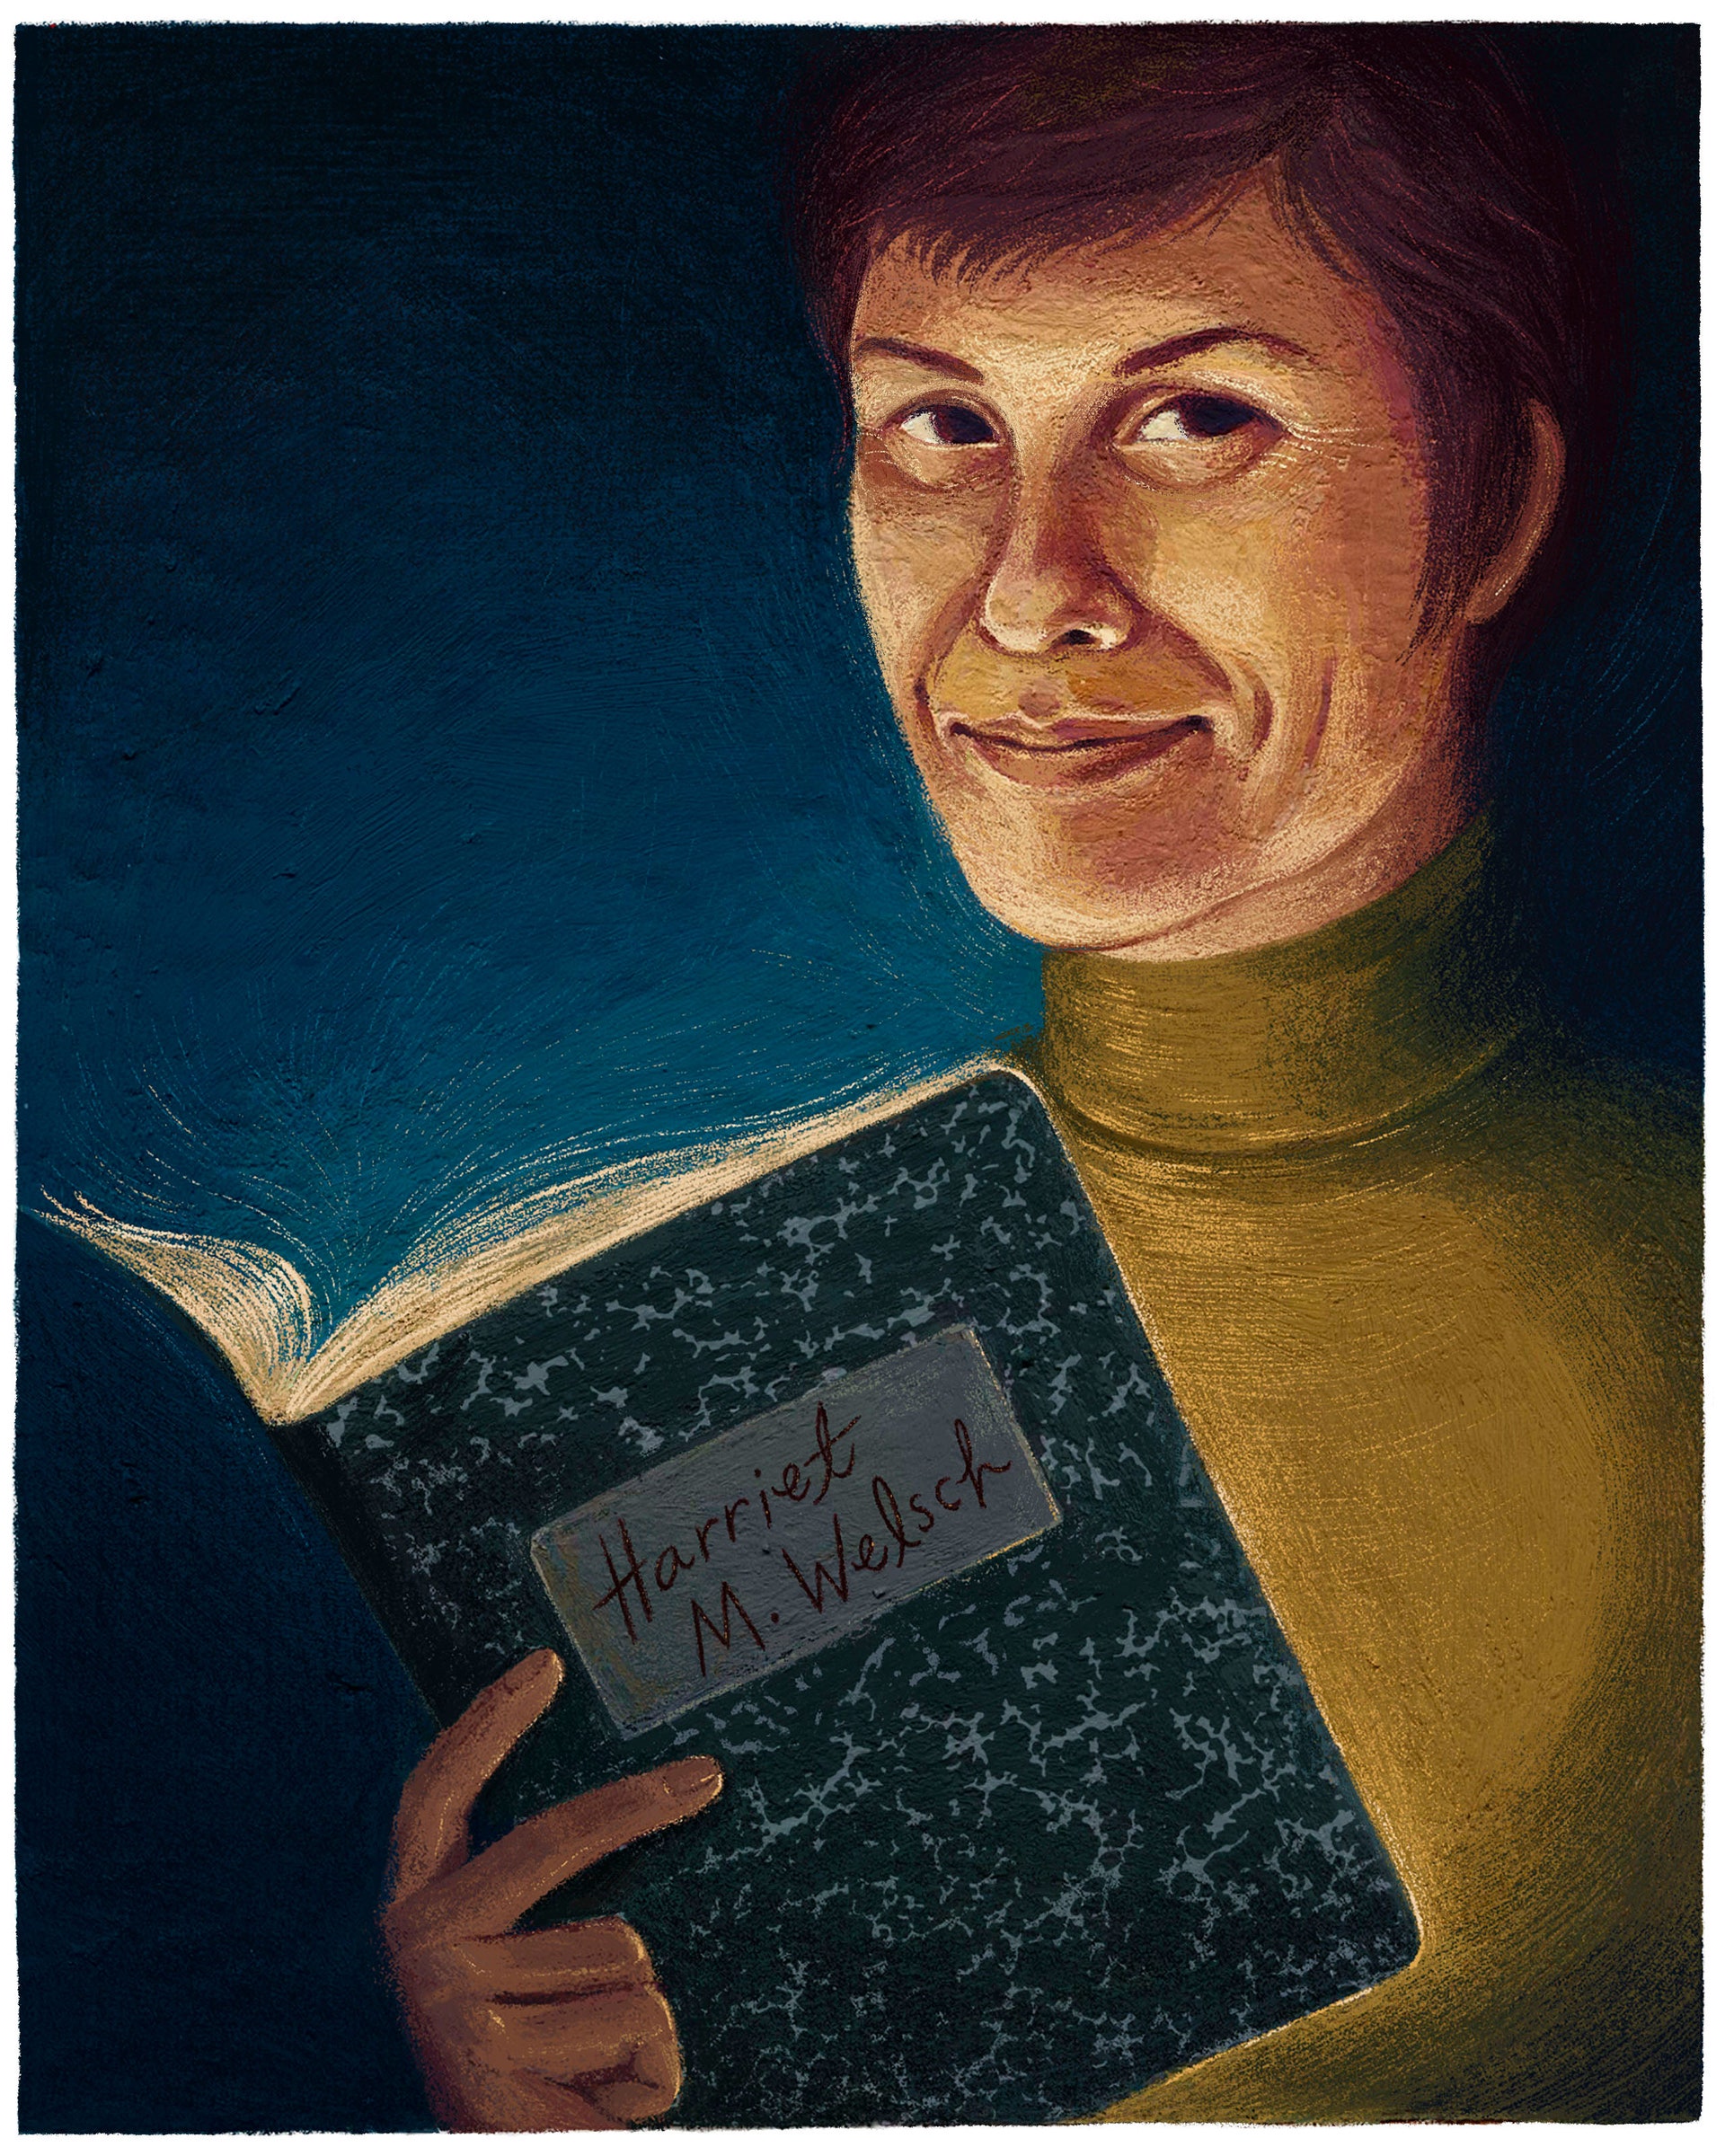 An illustration shows a light-skinned woman with cropped brown hair holding up a black-and-white marble notebook with the name “Harriet M. Welsch” written in the white central label section. The woman wears a mustard green turtleneck and smiles coyly at the viewer. The illustration is dark, with light seeming to emit from the open notebook itself, illuminating the woman’s face.